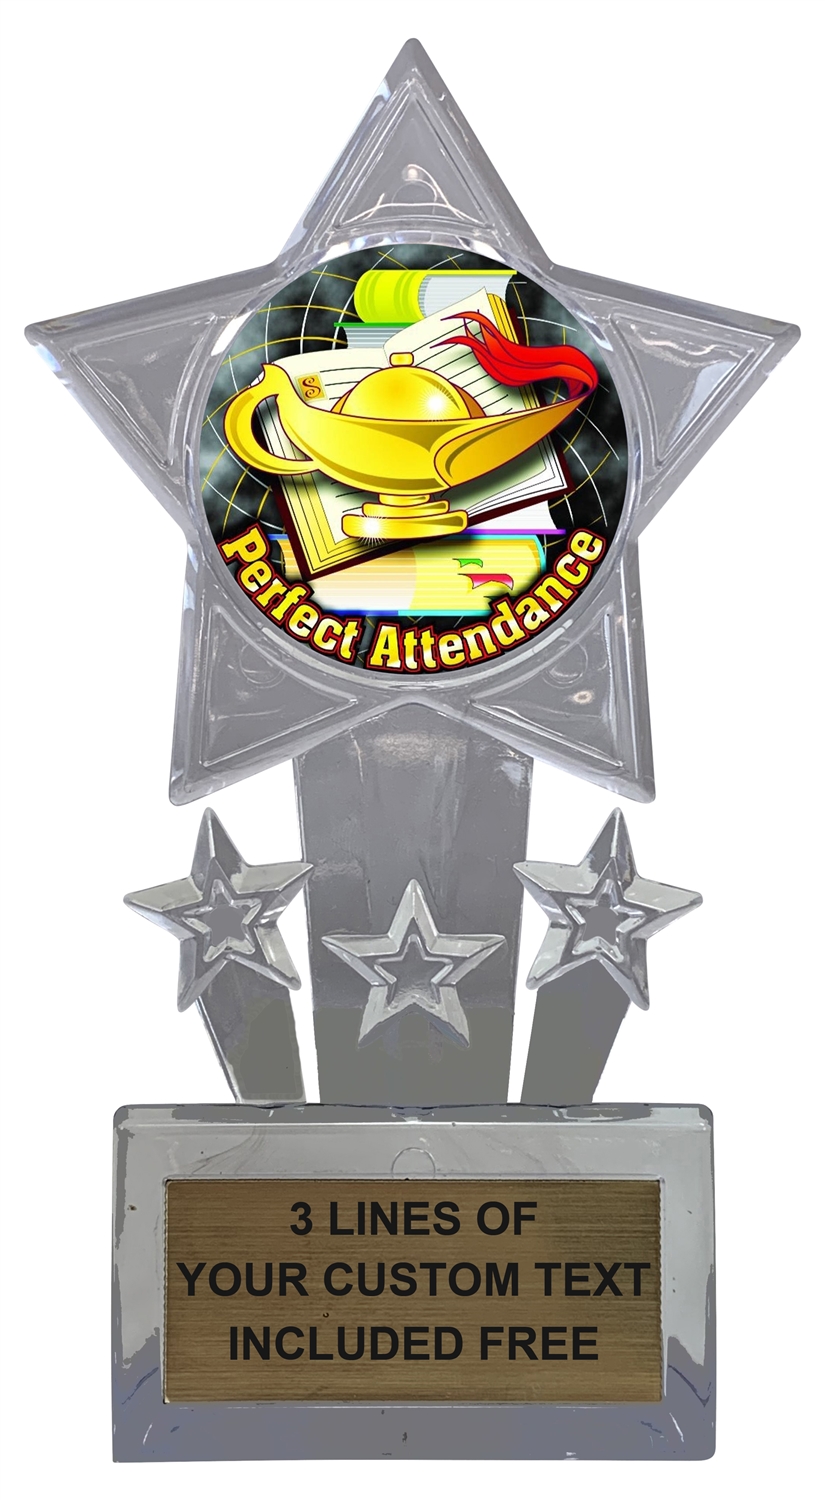 Perfect Attendance Trophy Cup